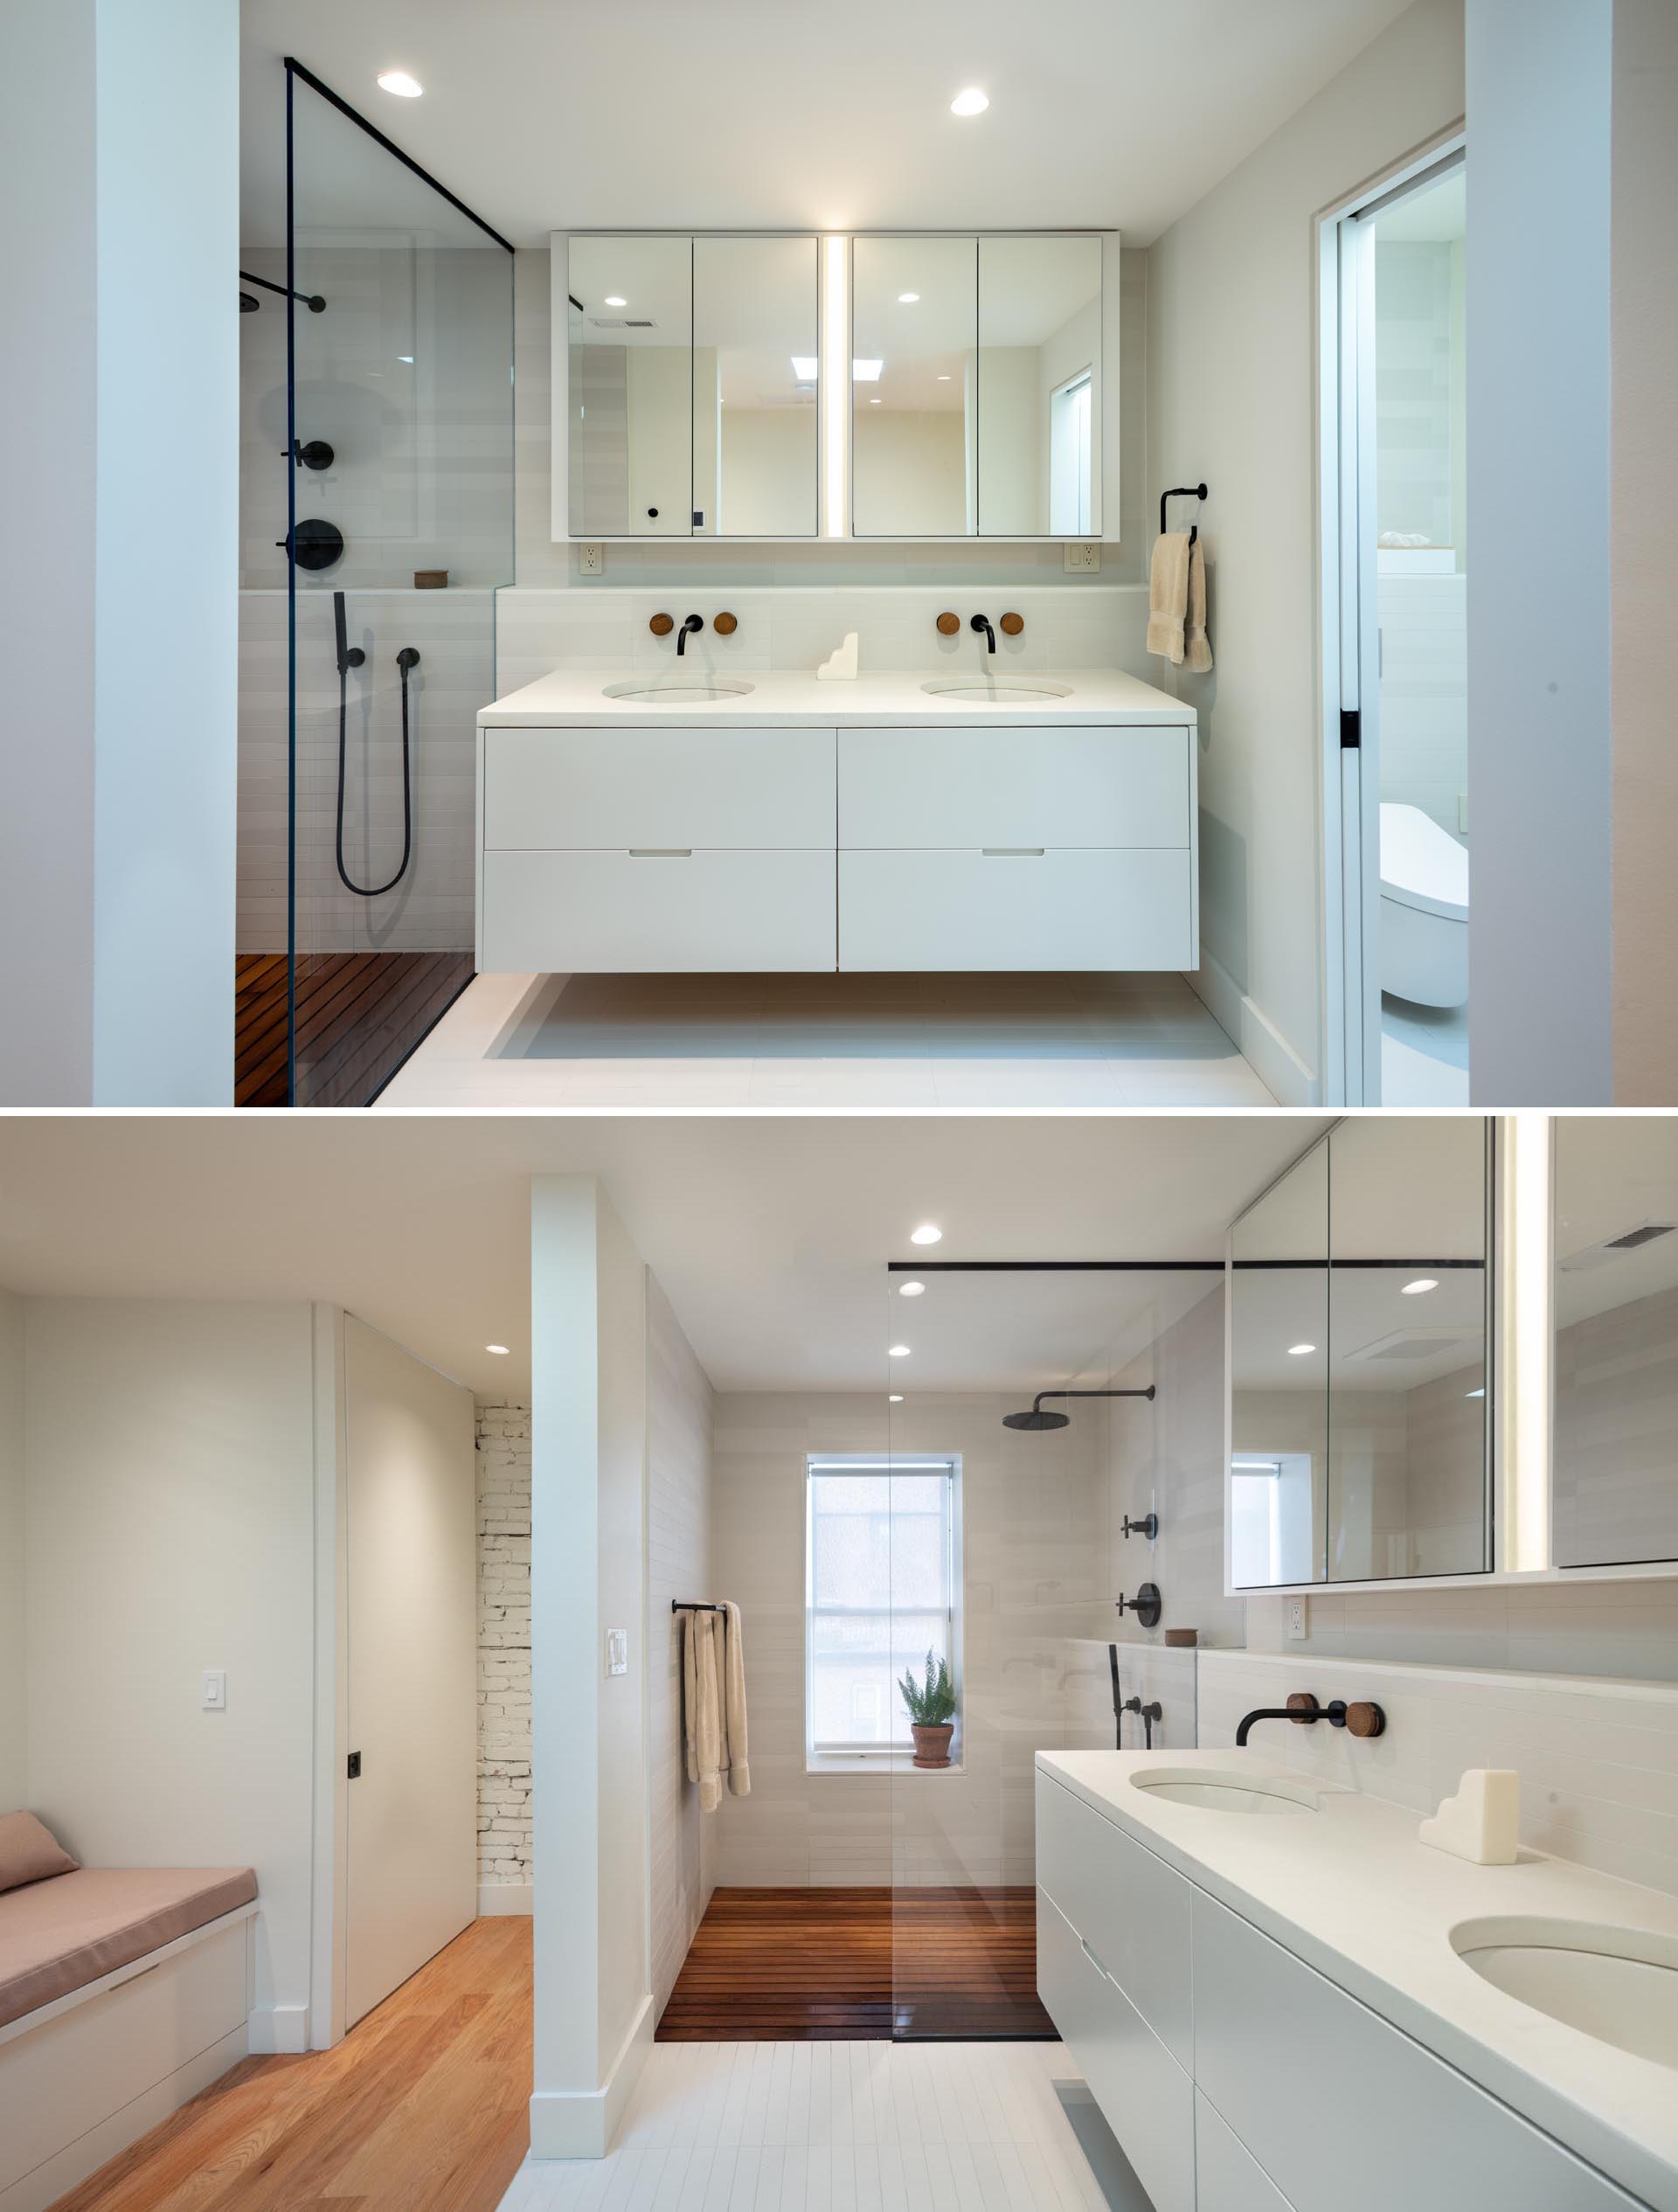 A modern bathroom with a floating white vanity, a walk-in shower with wood floor, and black accents.